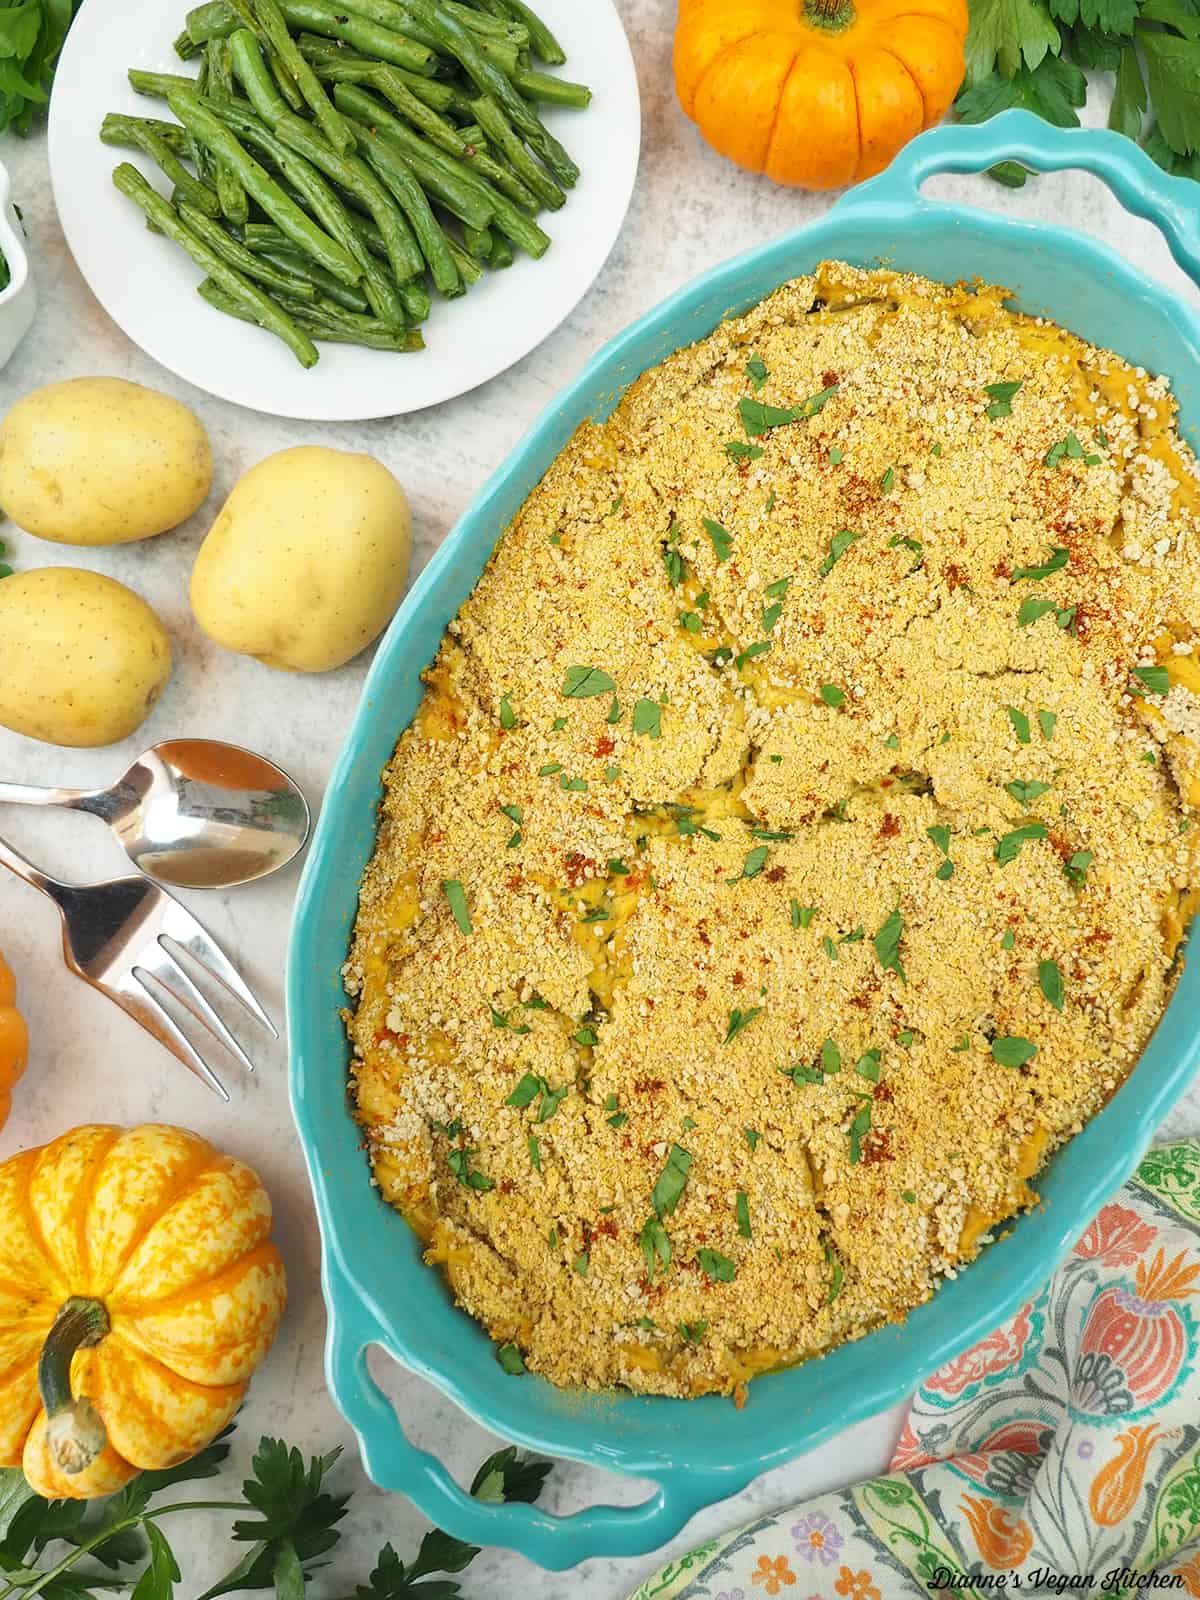 Potatoes Au Gratin in casserole dish with green beans and mini pumpkins